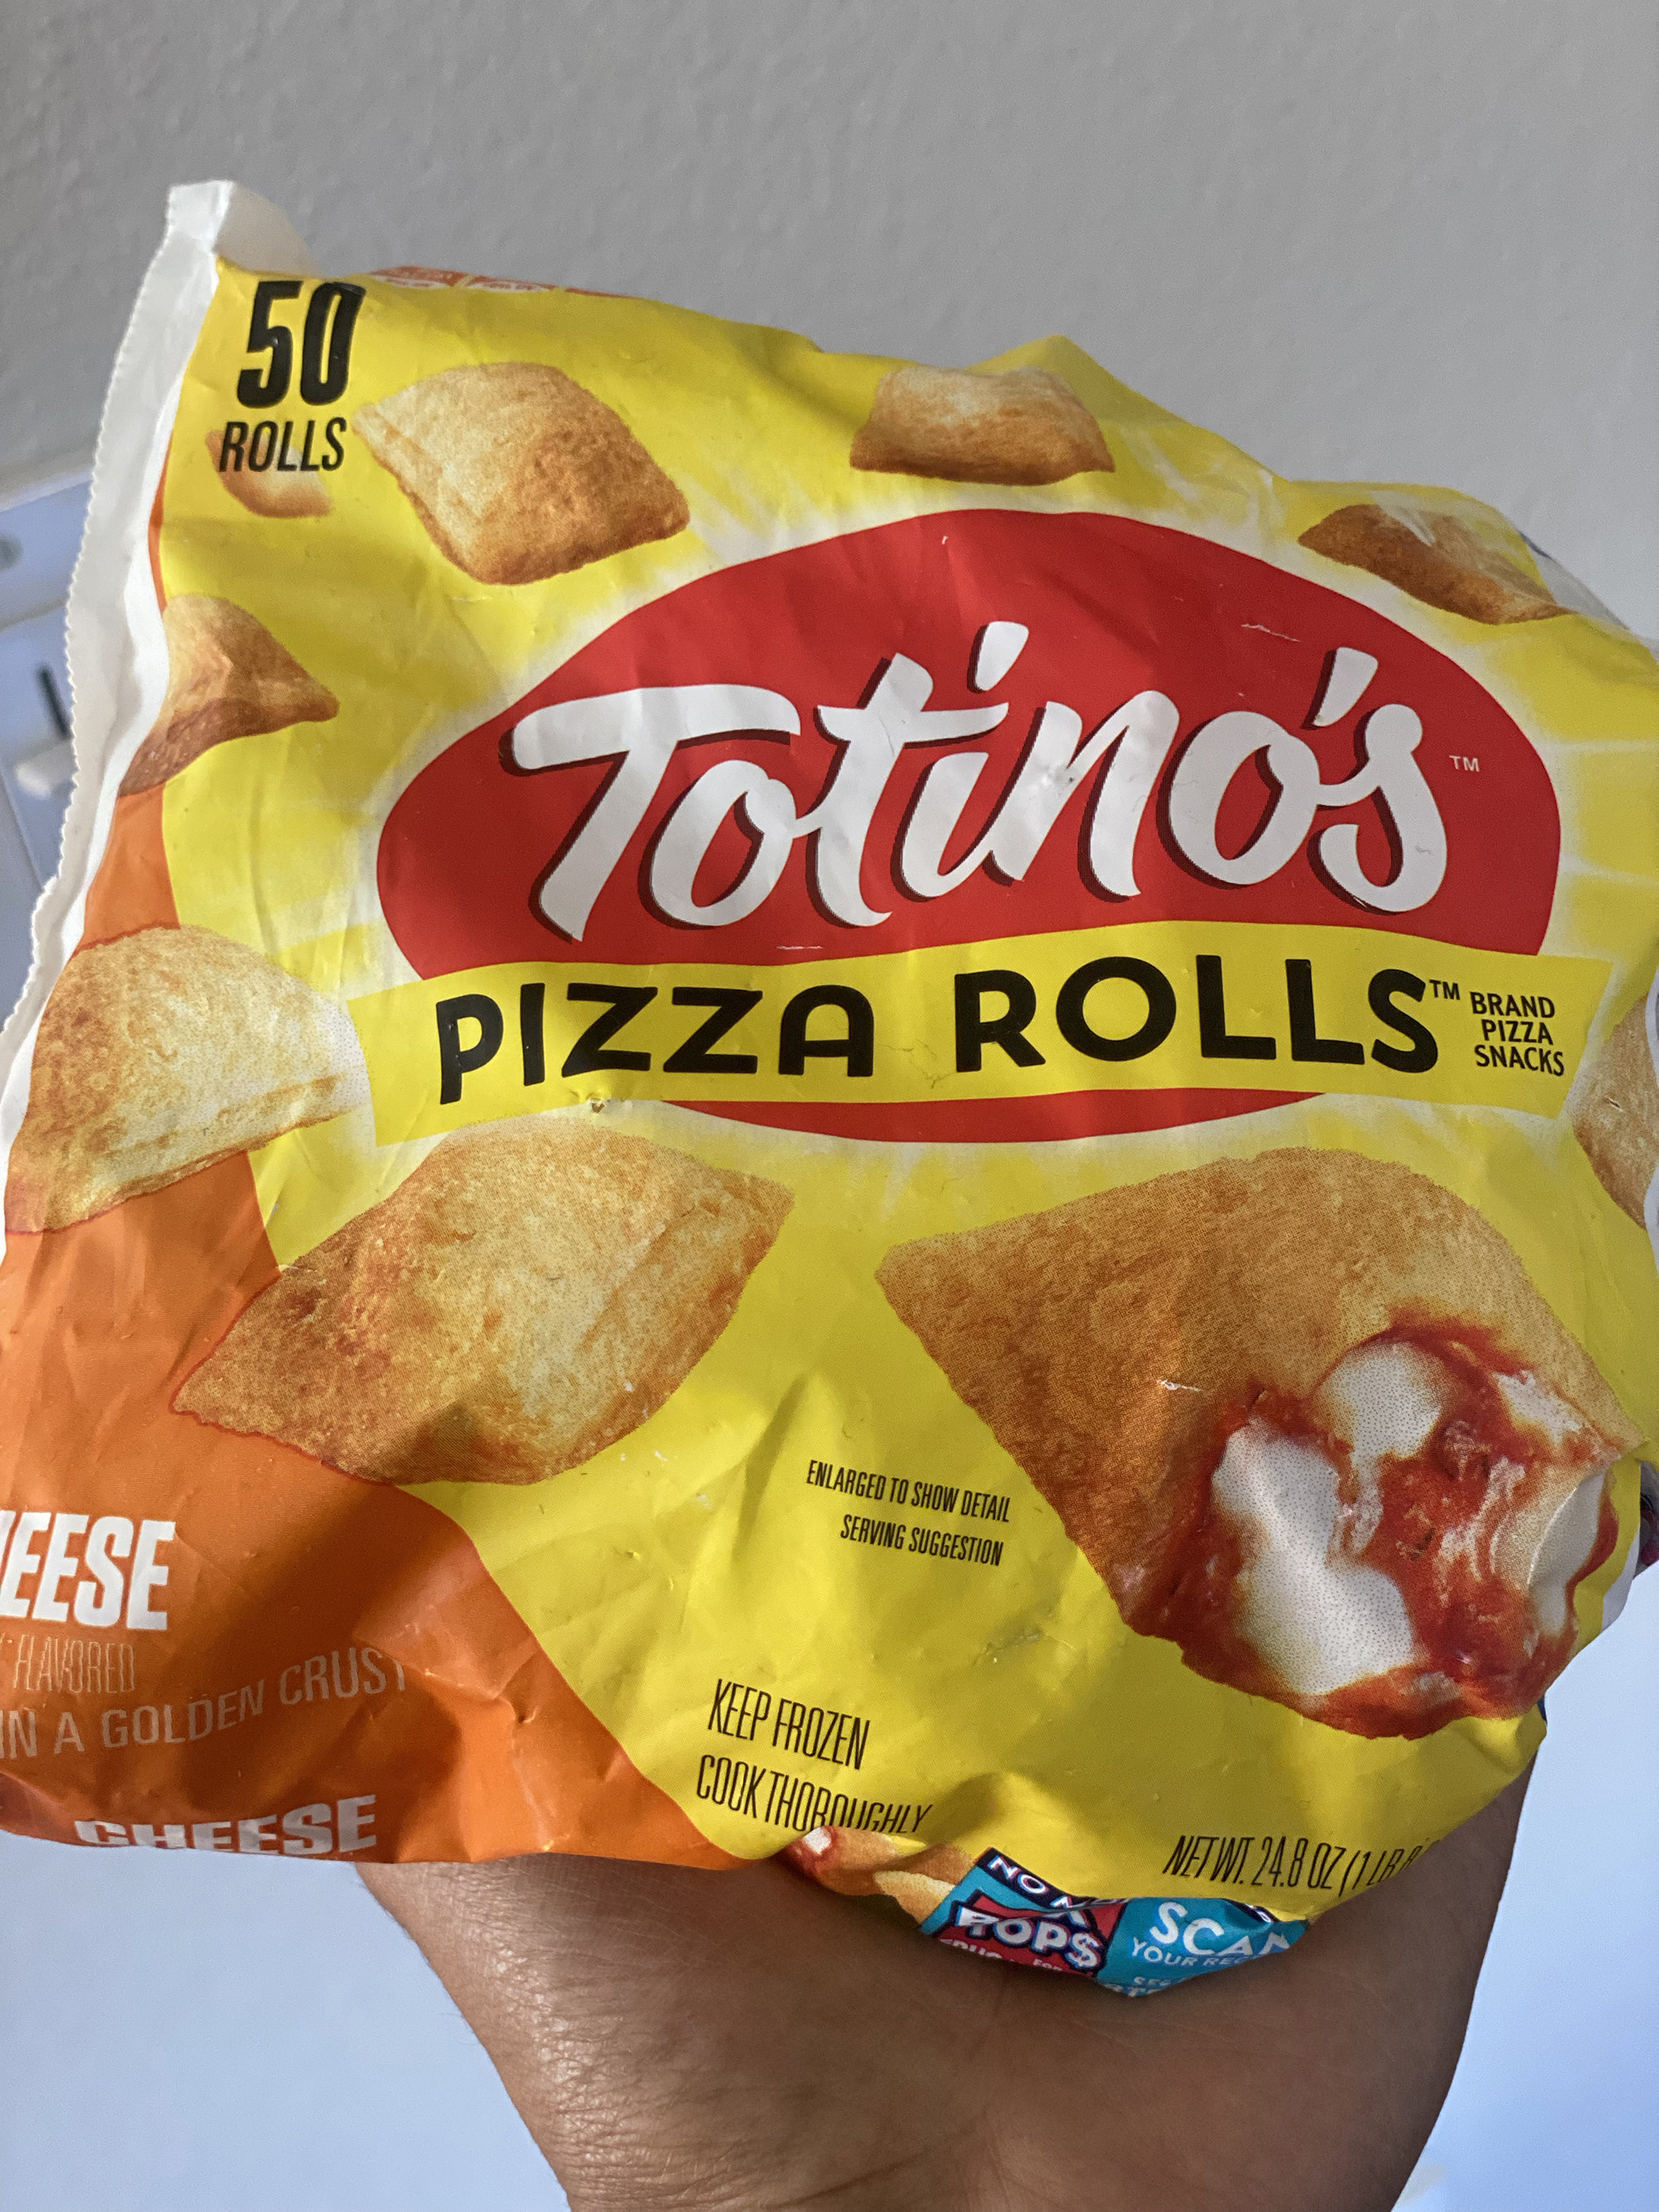 a bag advertising 50 rolls with photos of the bite-sized snack